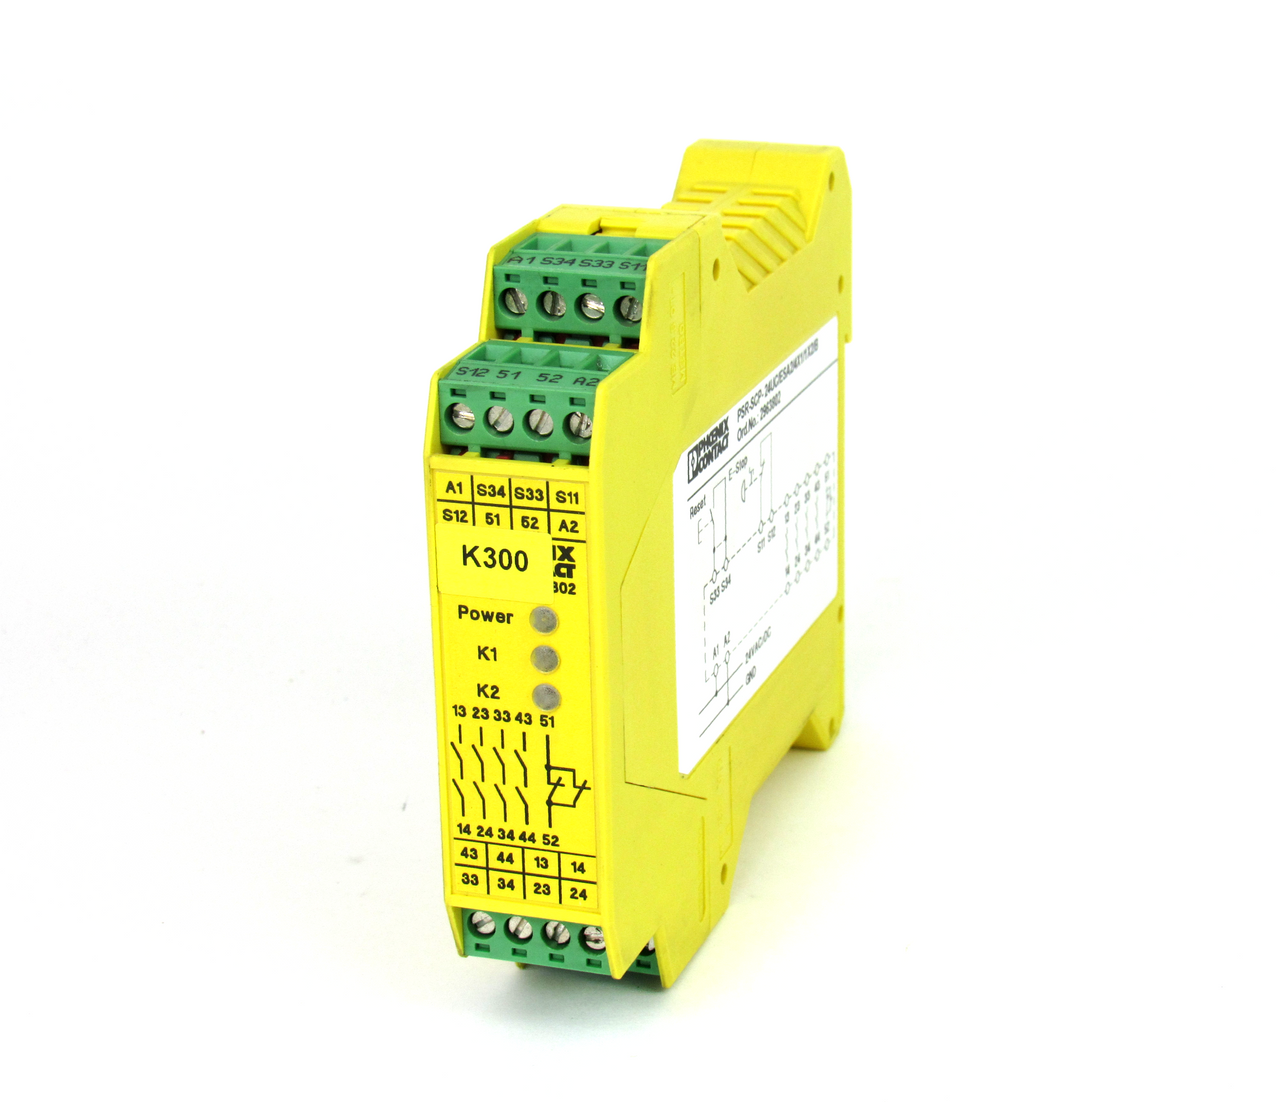 Phoenix Contact PSR-SCP-24UC/ESM4/2X1/1X2 2963718 Safety Relay #1